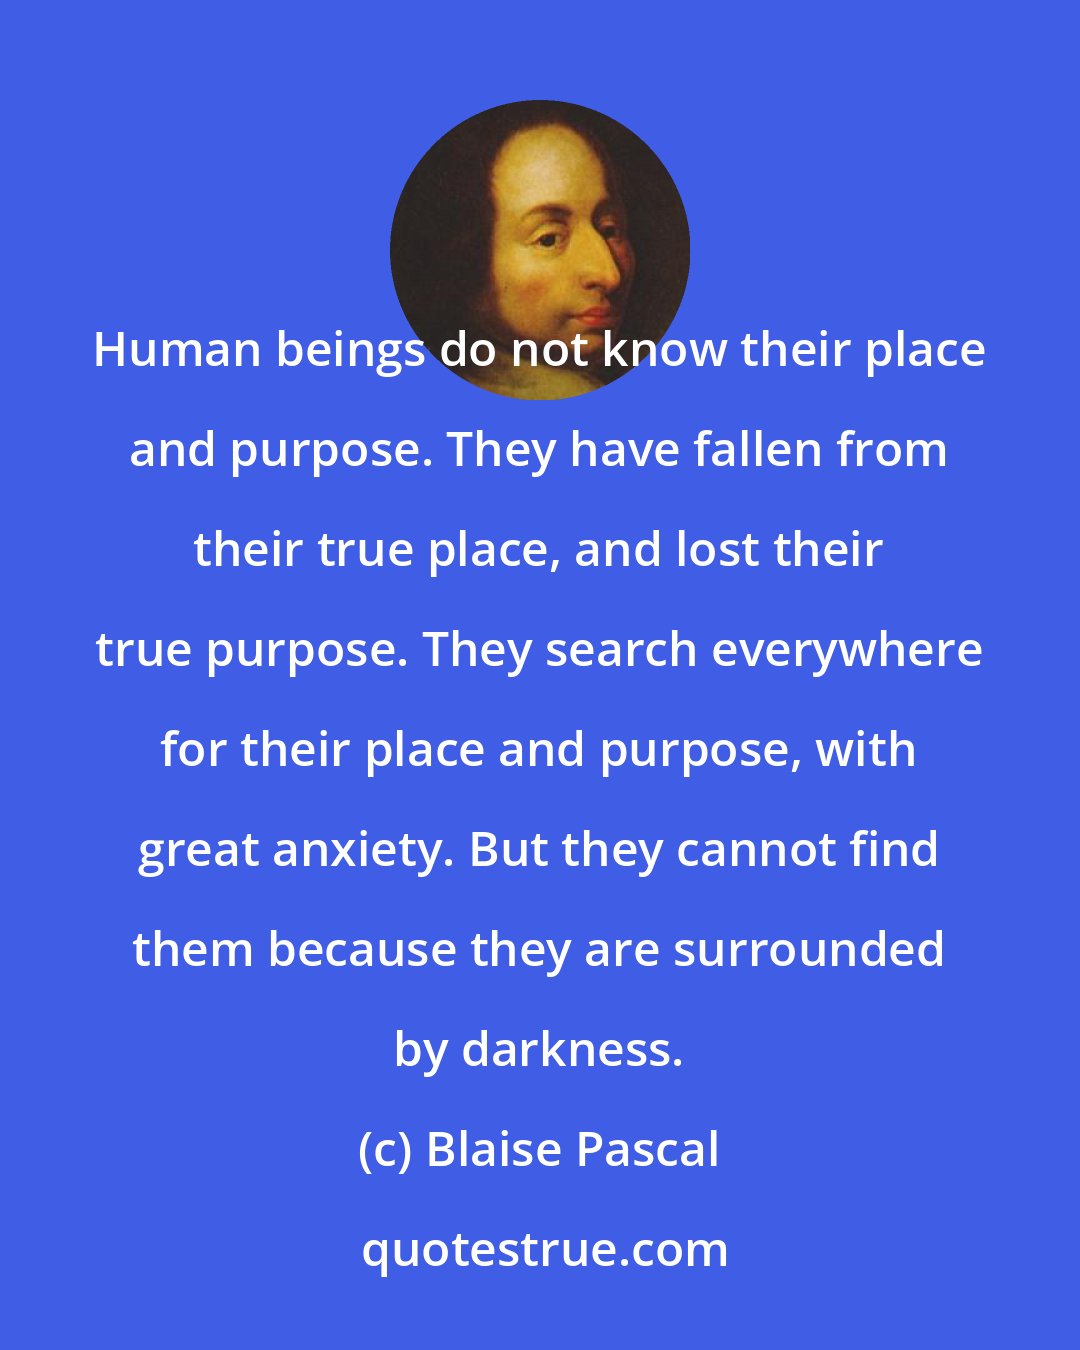 Blaise Pascal: Human beings do not know their place and purpose. They have fallen from their true place, and lost their true purpose. They search everywhere for their place and purpose, with great anxiety. But they cannot find them because they are surrounded by darkness.